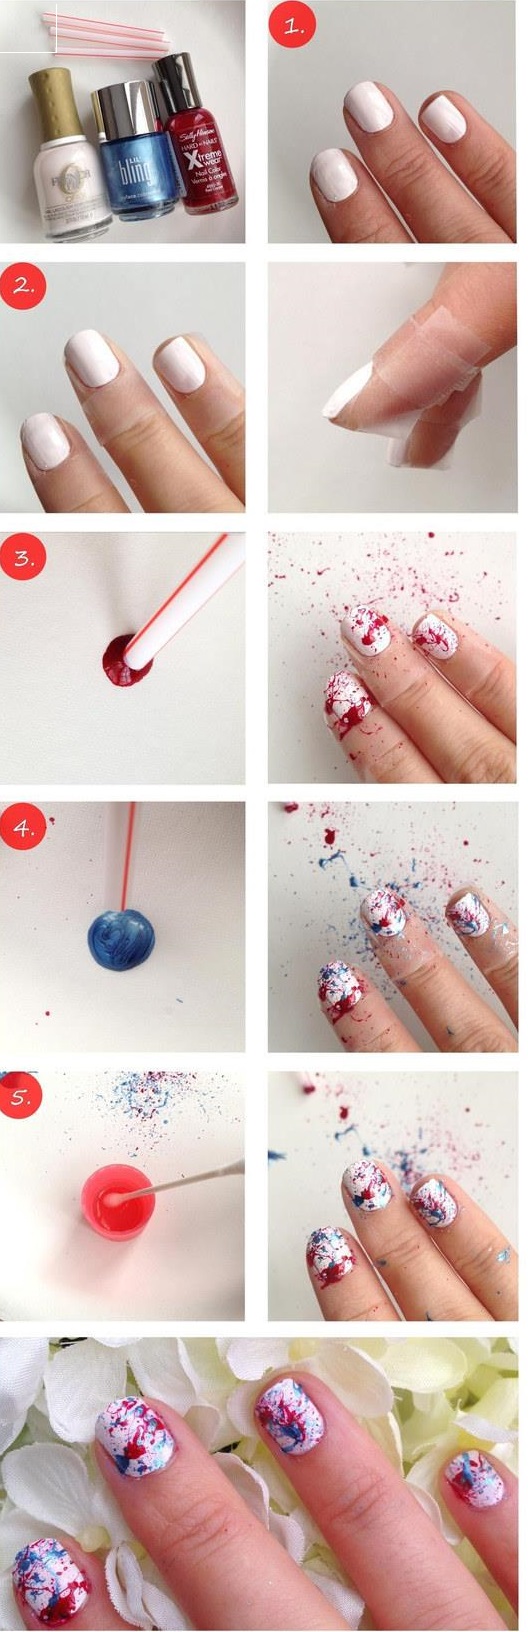 17 Easy And Cool Step By Step Nail Art Tutorials - Womentriangle